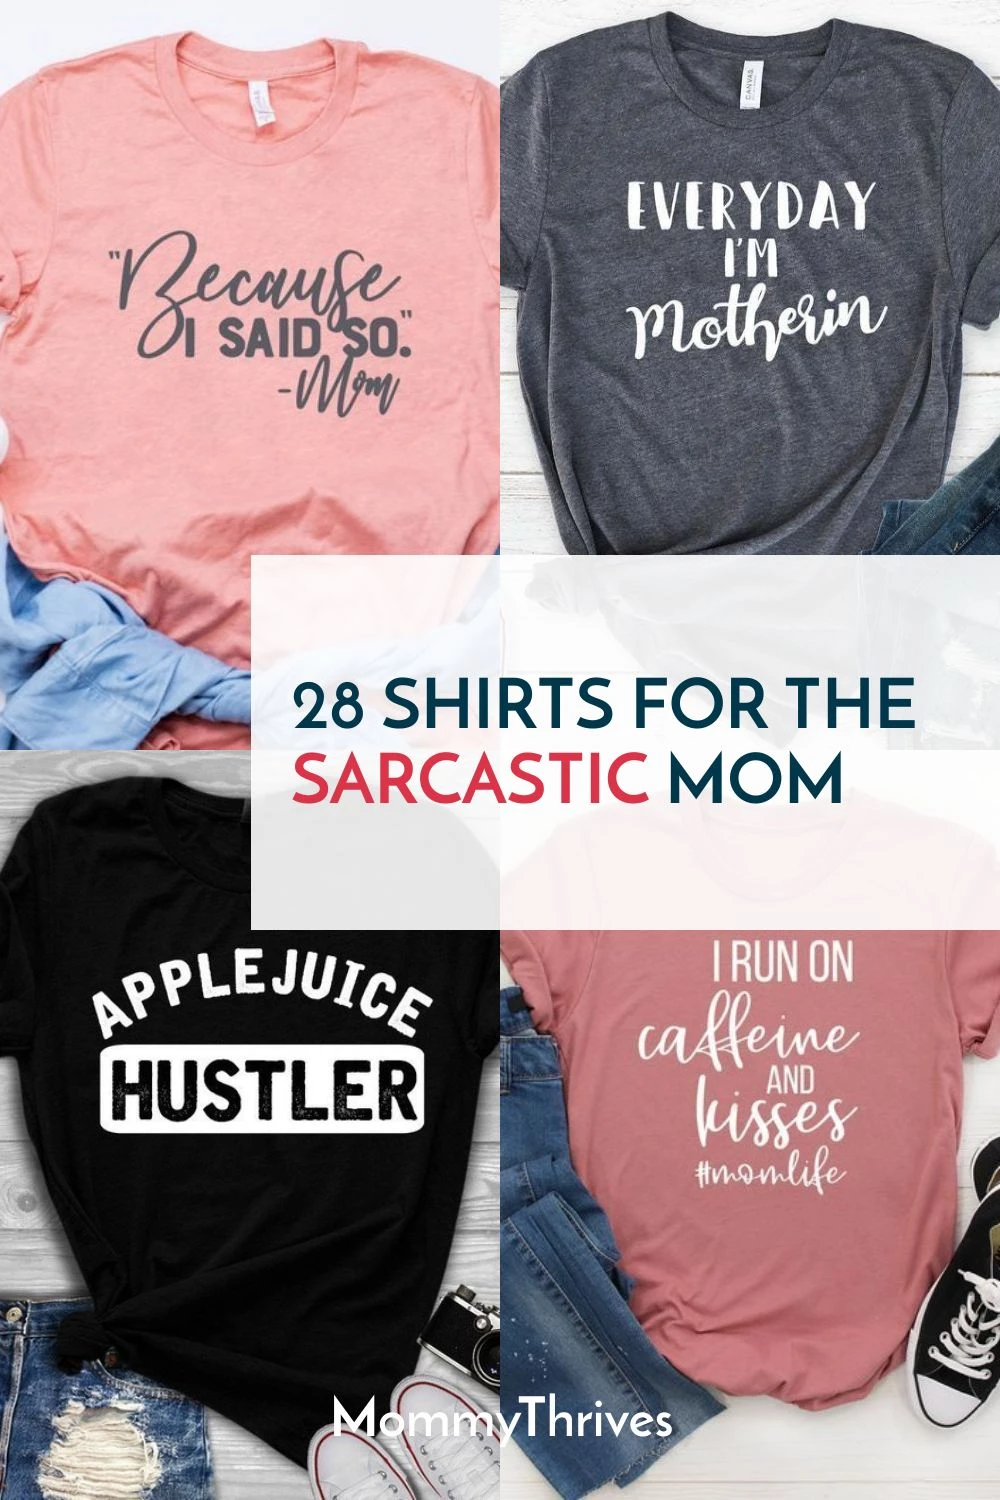 28 Shirts For The Sarcastic Mom - MommyThrives